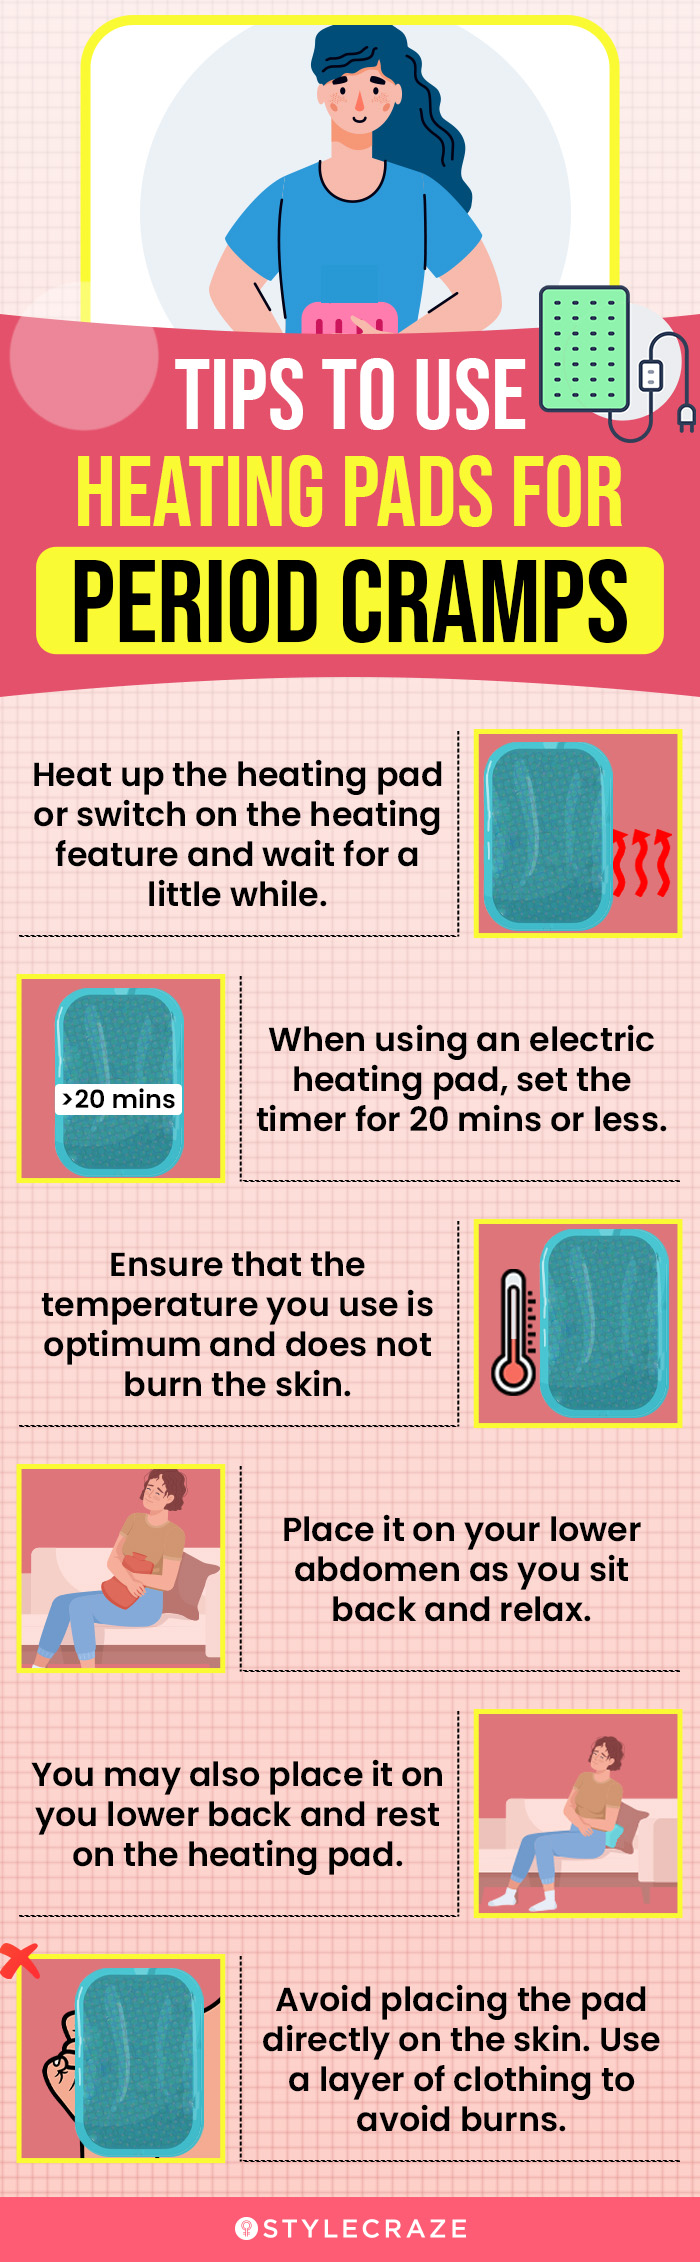 Tips To Use Heating Pads For Period Cramps (infographic)